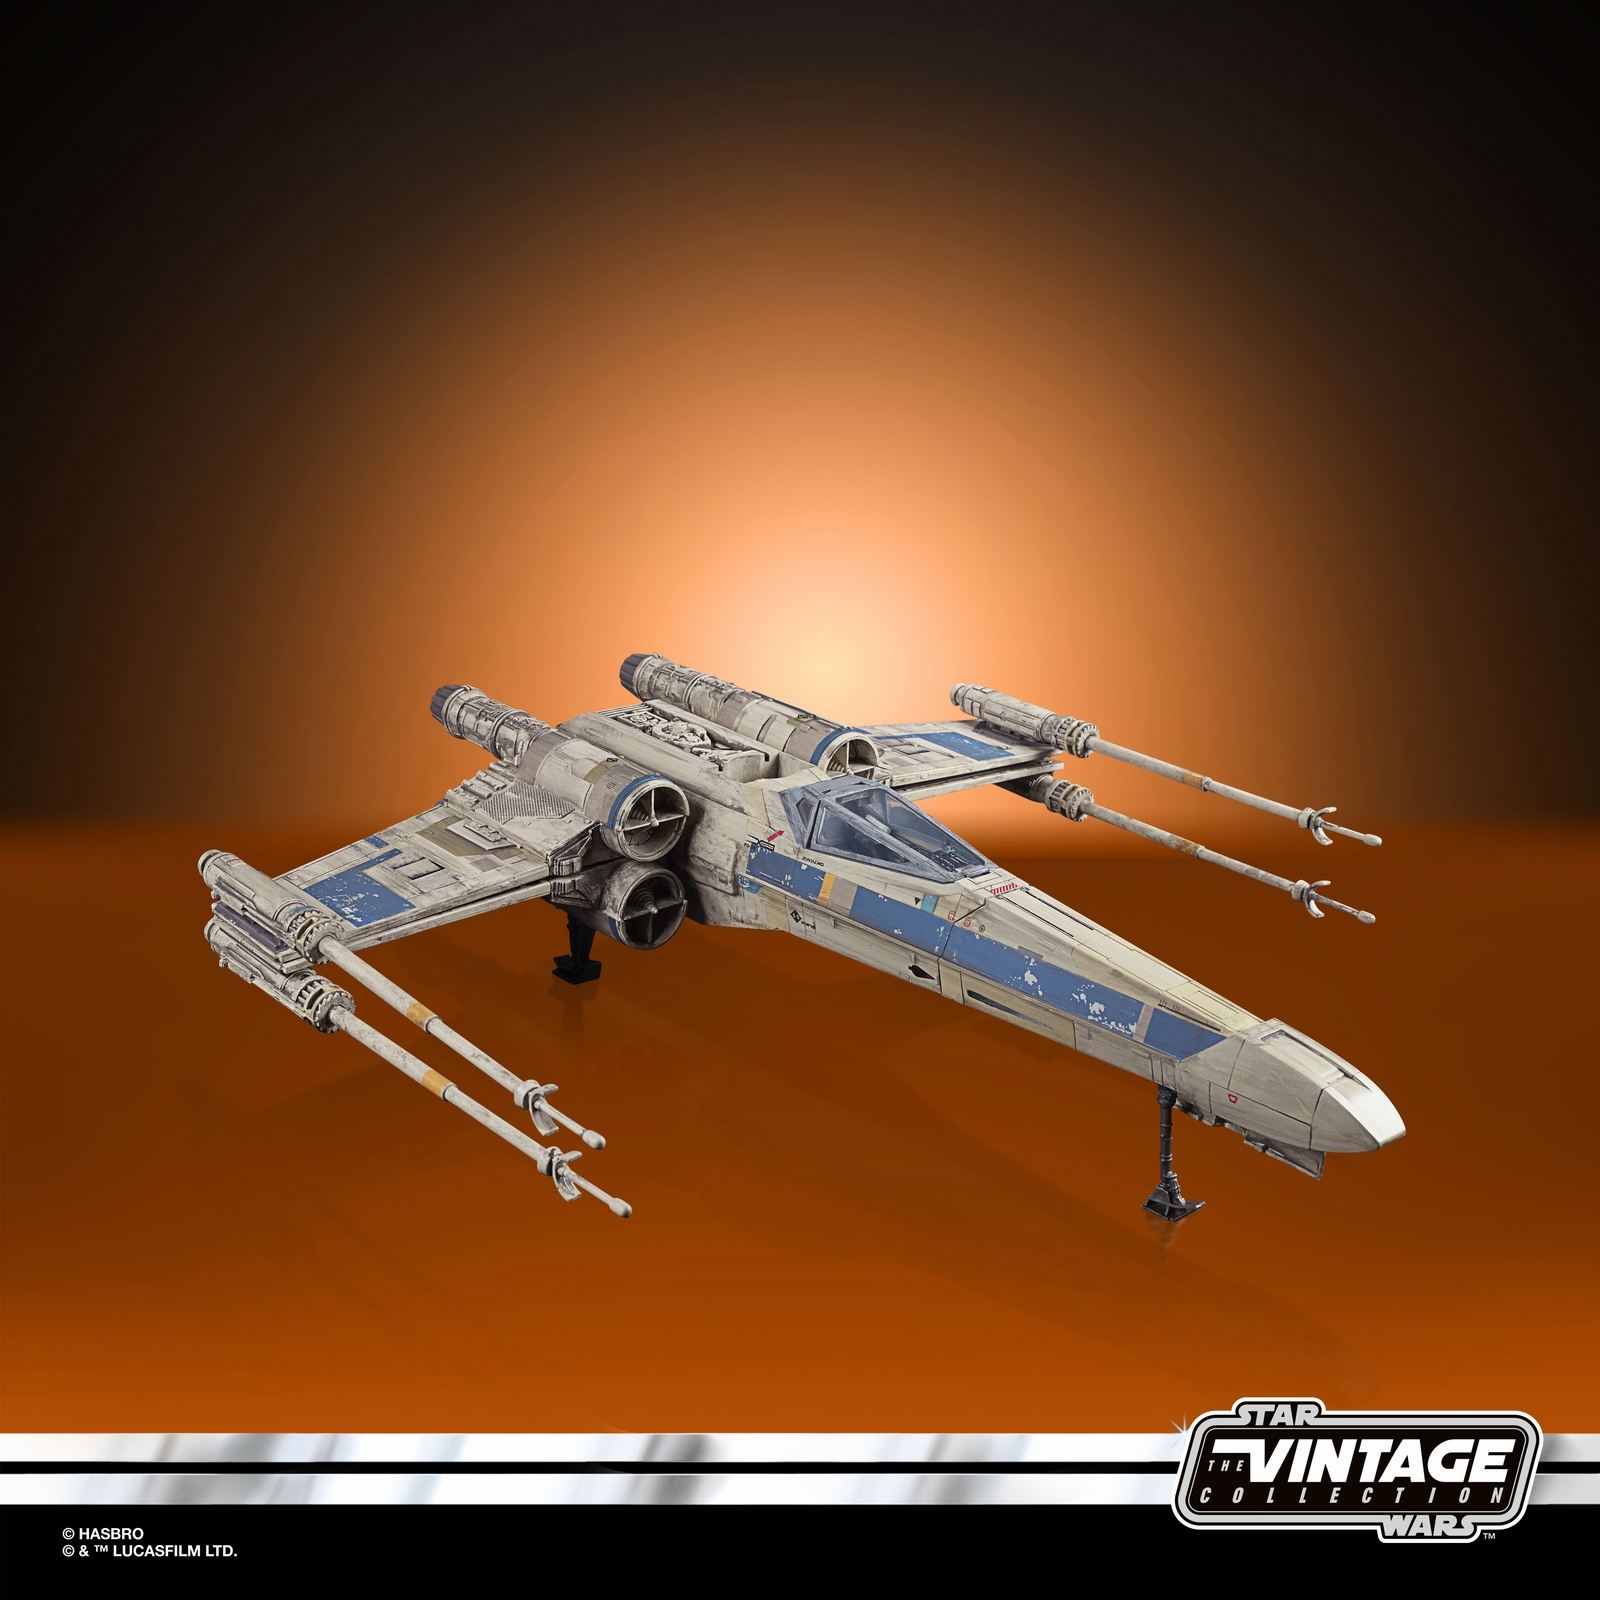 STAR WARS THE VINTAGE COLLECTION ANTOC MERRICK’S X-WING FIGHTER Vehicle and Figure - oop 3.jpg